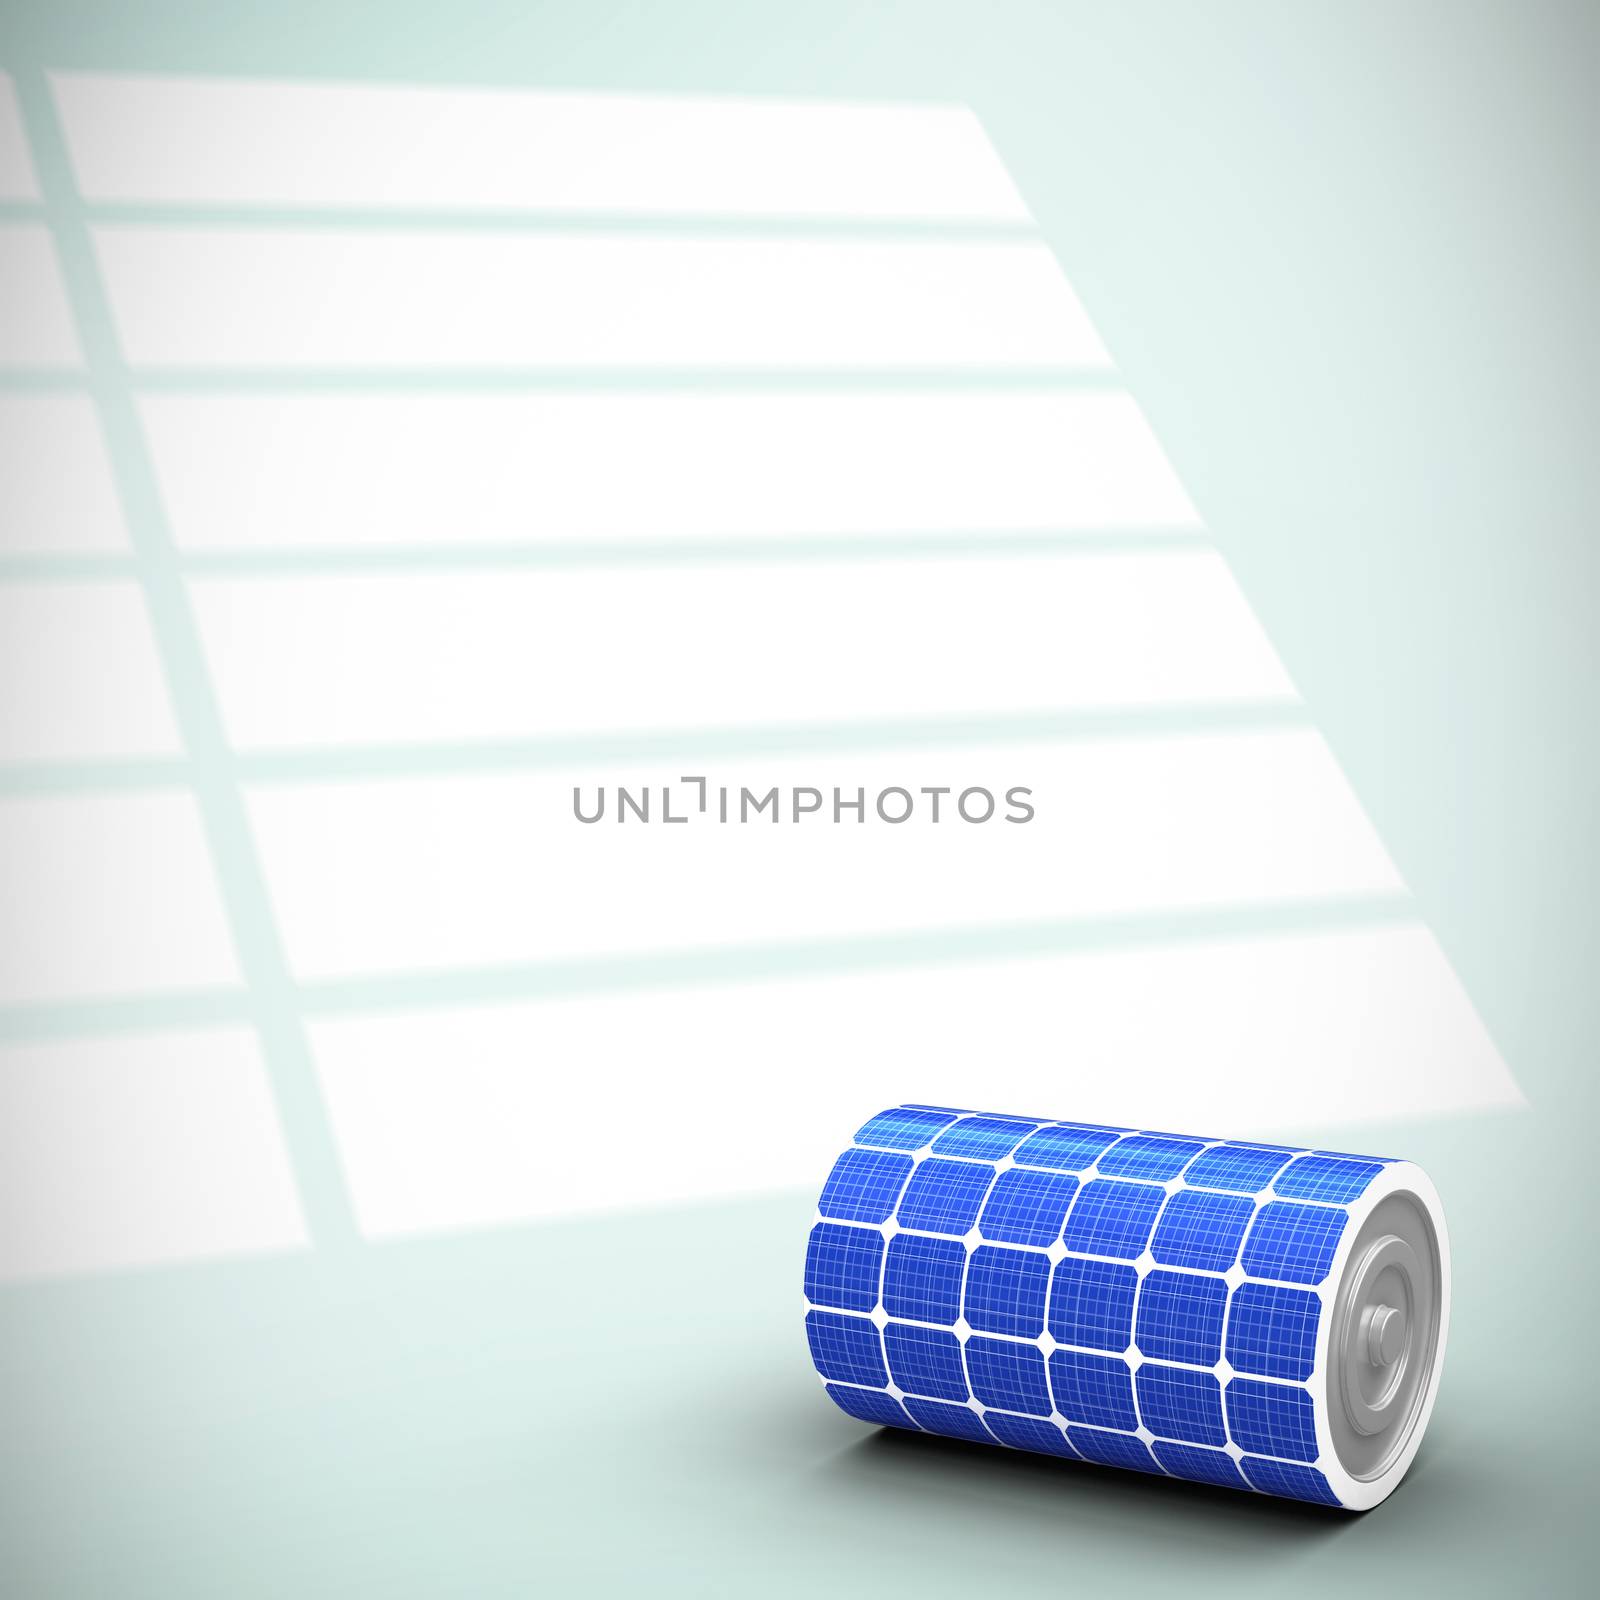 Vector image of 3d solar power battery against squares on bright background